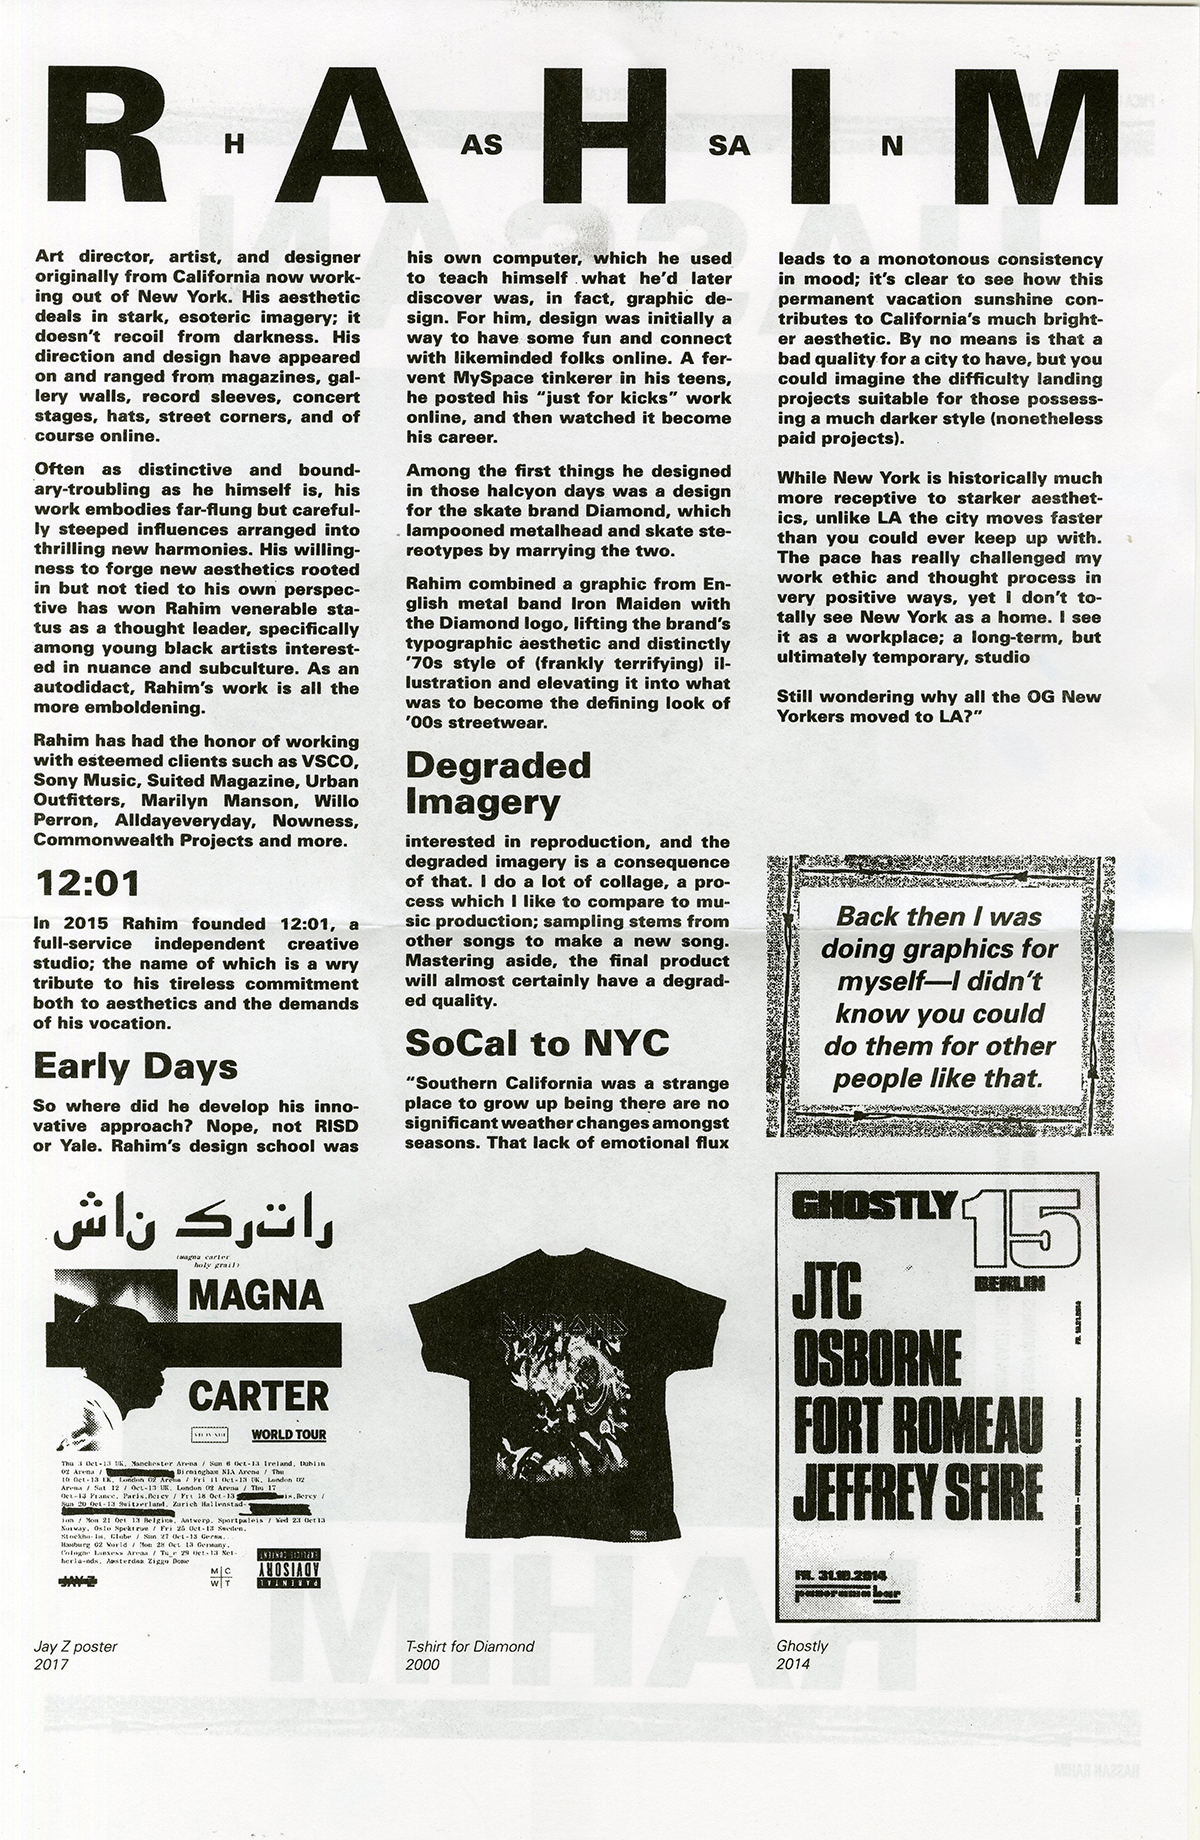 Black Monochromatic newsprint poster design with heavy font text reads 'Hassan Rahim' at top, with news print text below and saturated black spot images